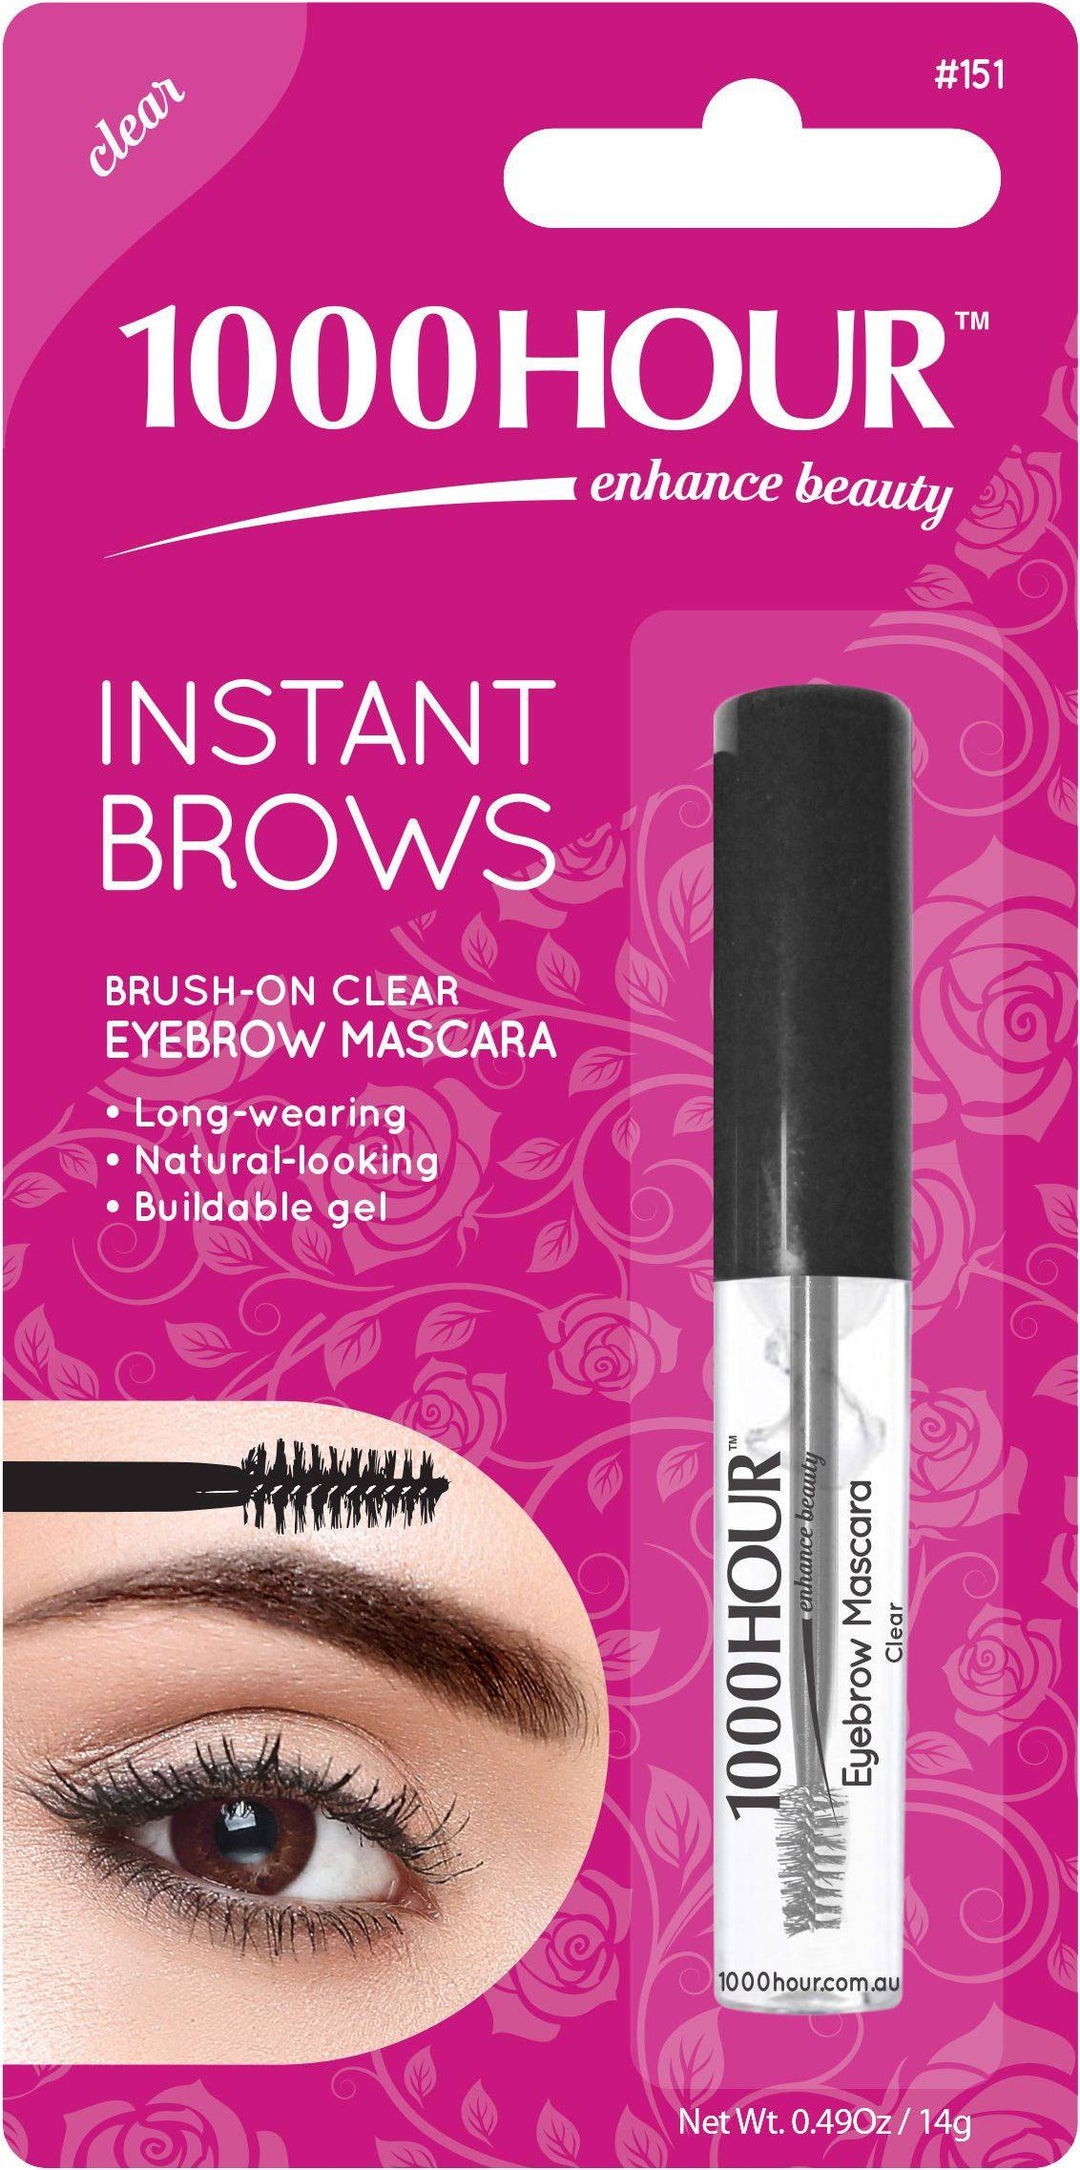 1000HOUR INSTANT BROW MASCARA - CLEAR - Pretty Woman NYC